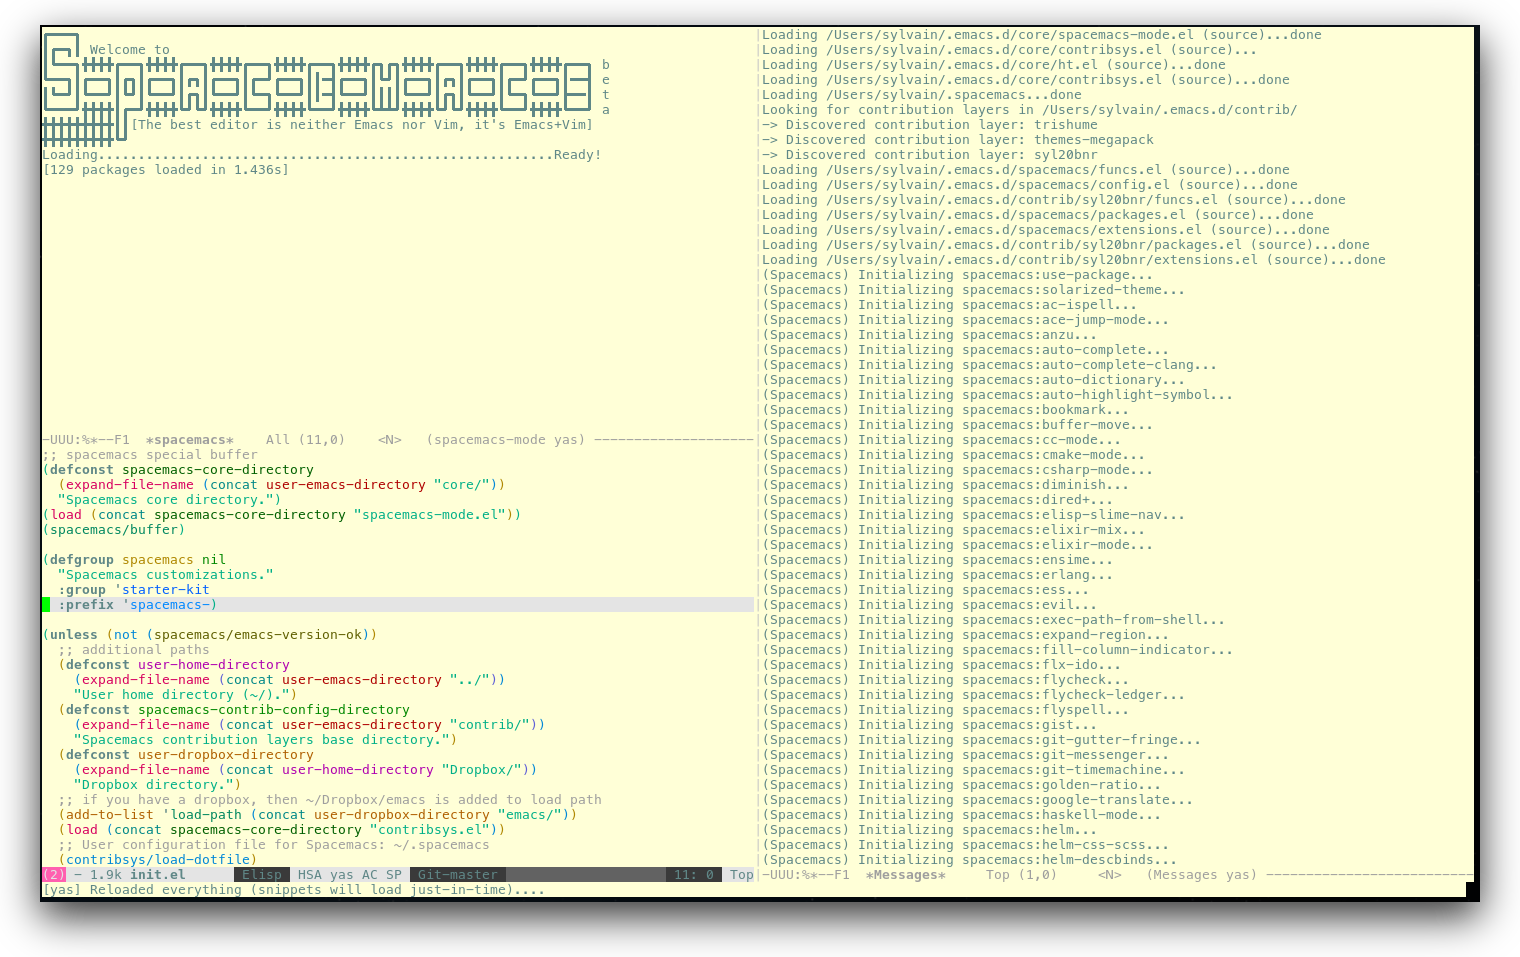 /TakeV/spacemacs/media/commit/91dcafe9936b862168eac0bce39ae2f48ecdc880/doc/img/spacemacs-urxvt.png